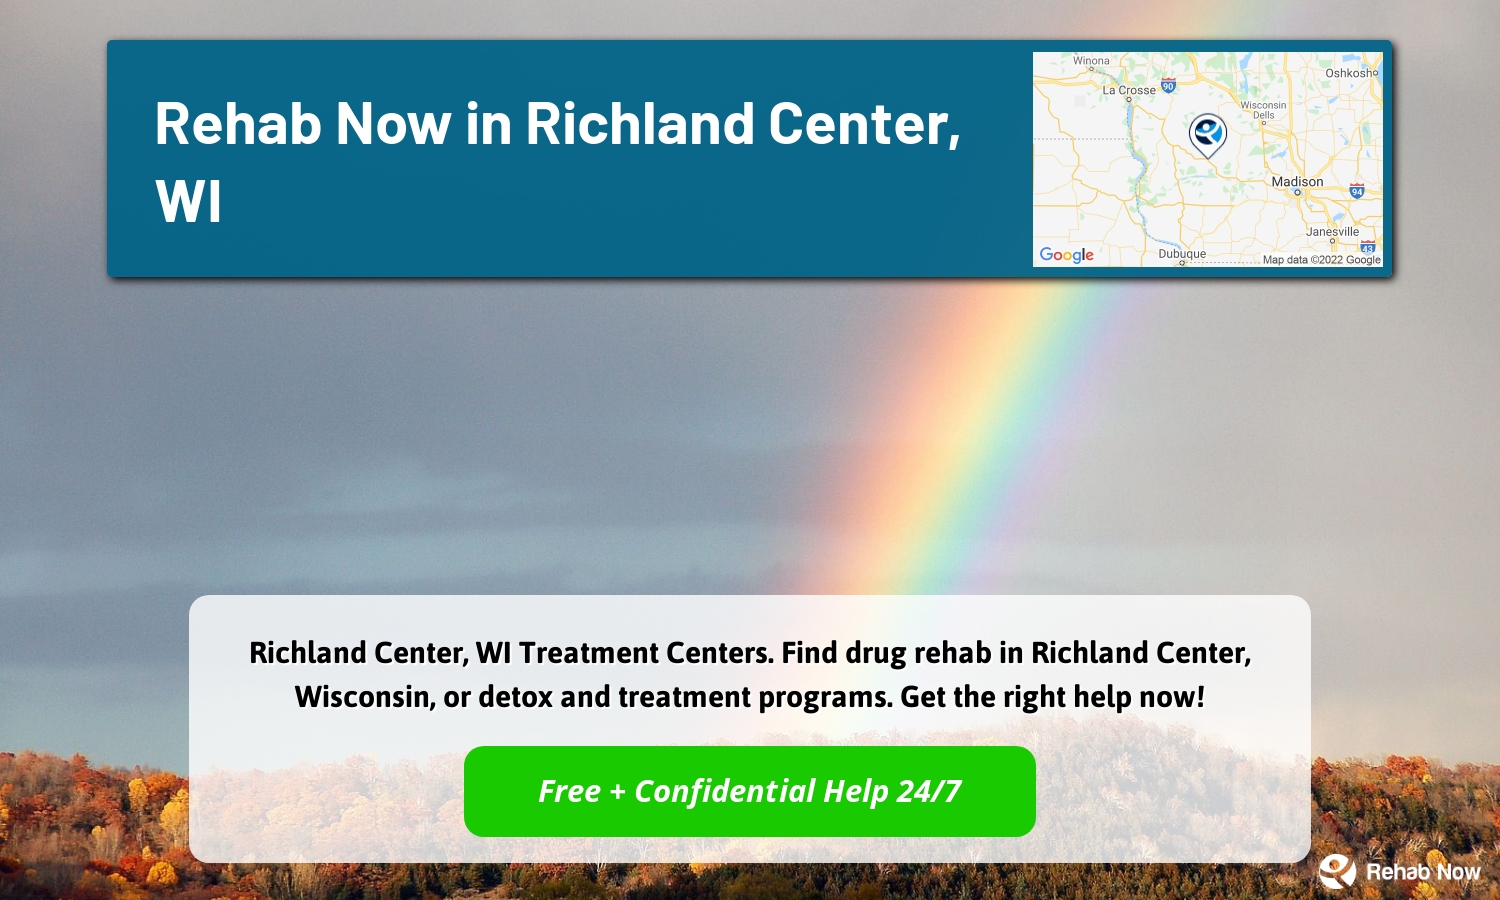 Richland Center, WI Treatment Centers. Find drug rehab in Richland Center, Wisconsin, or detox and treatment programs. Get the right help now!